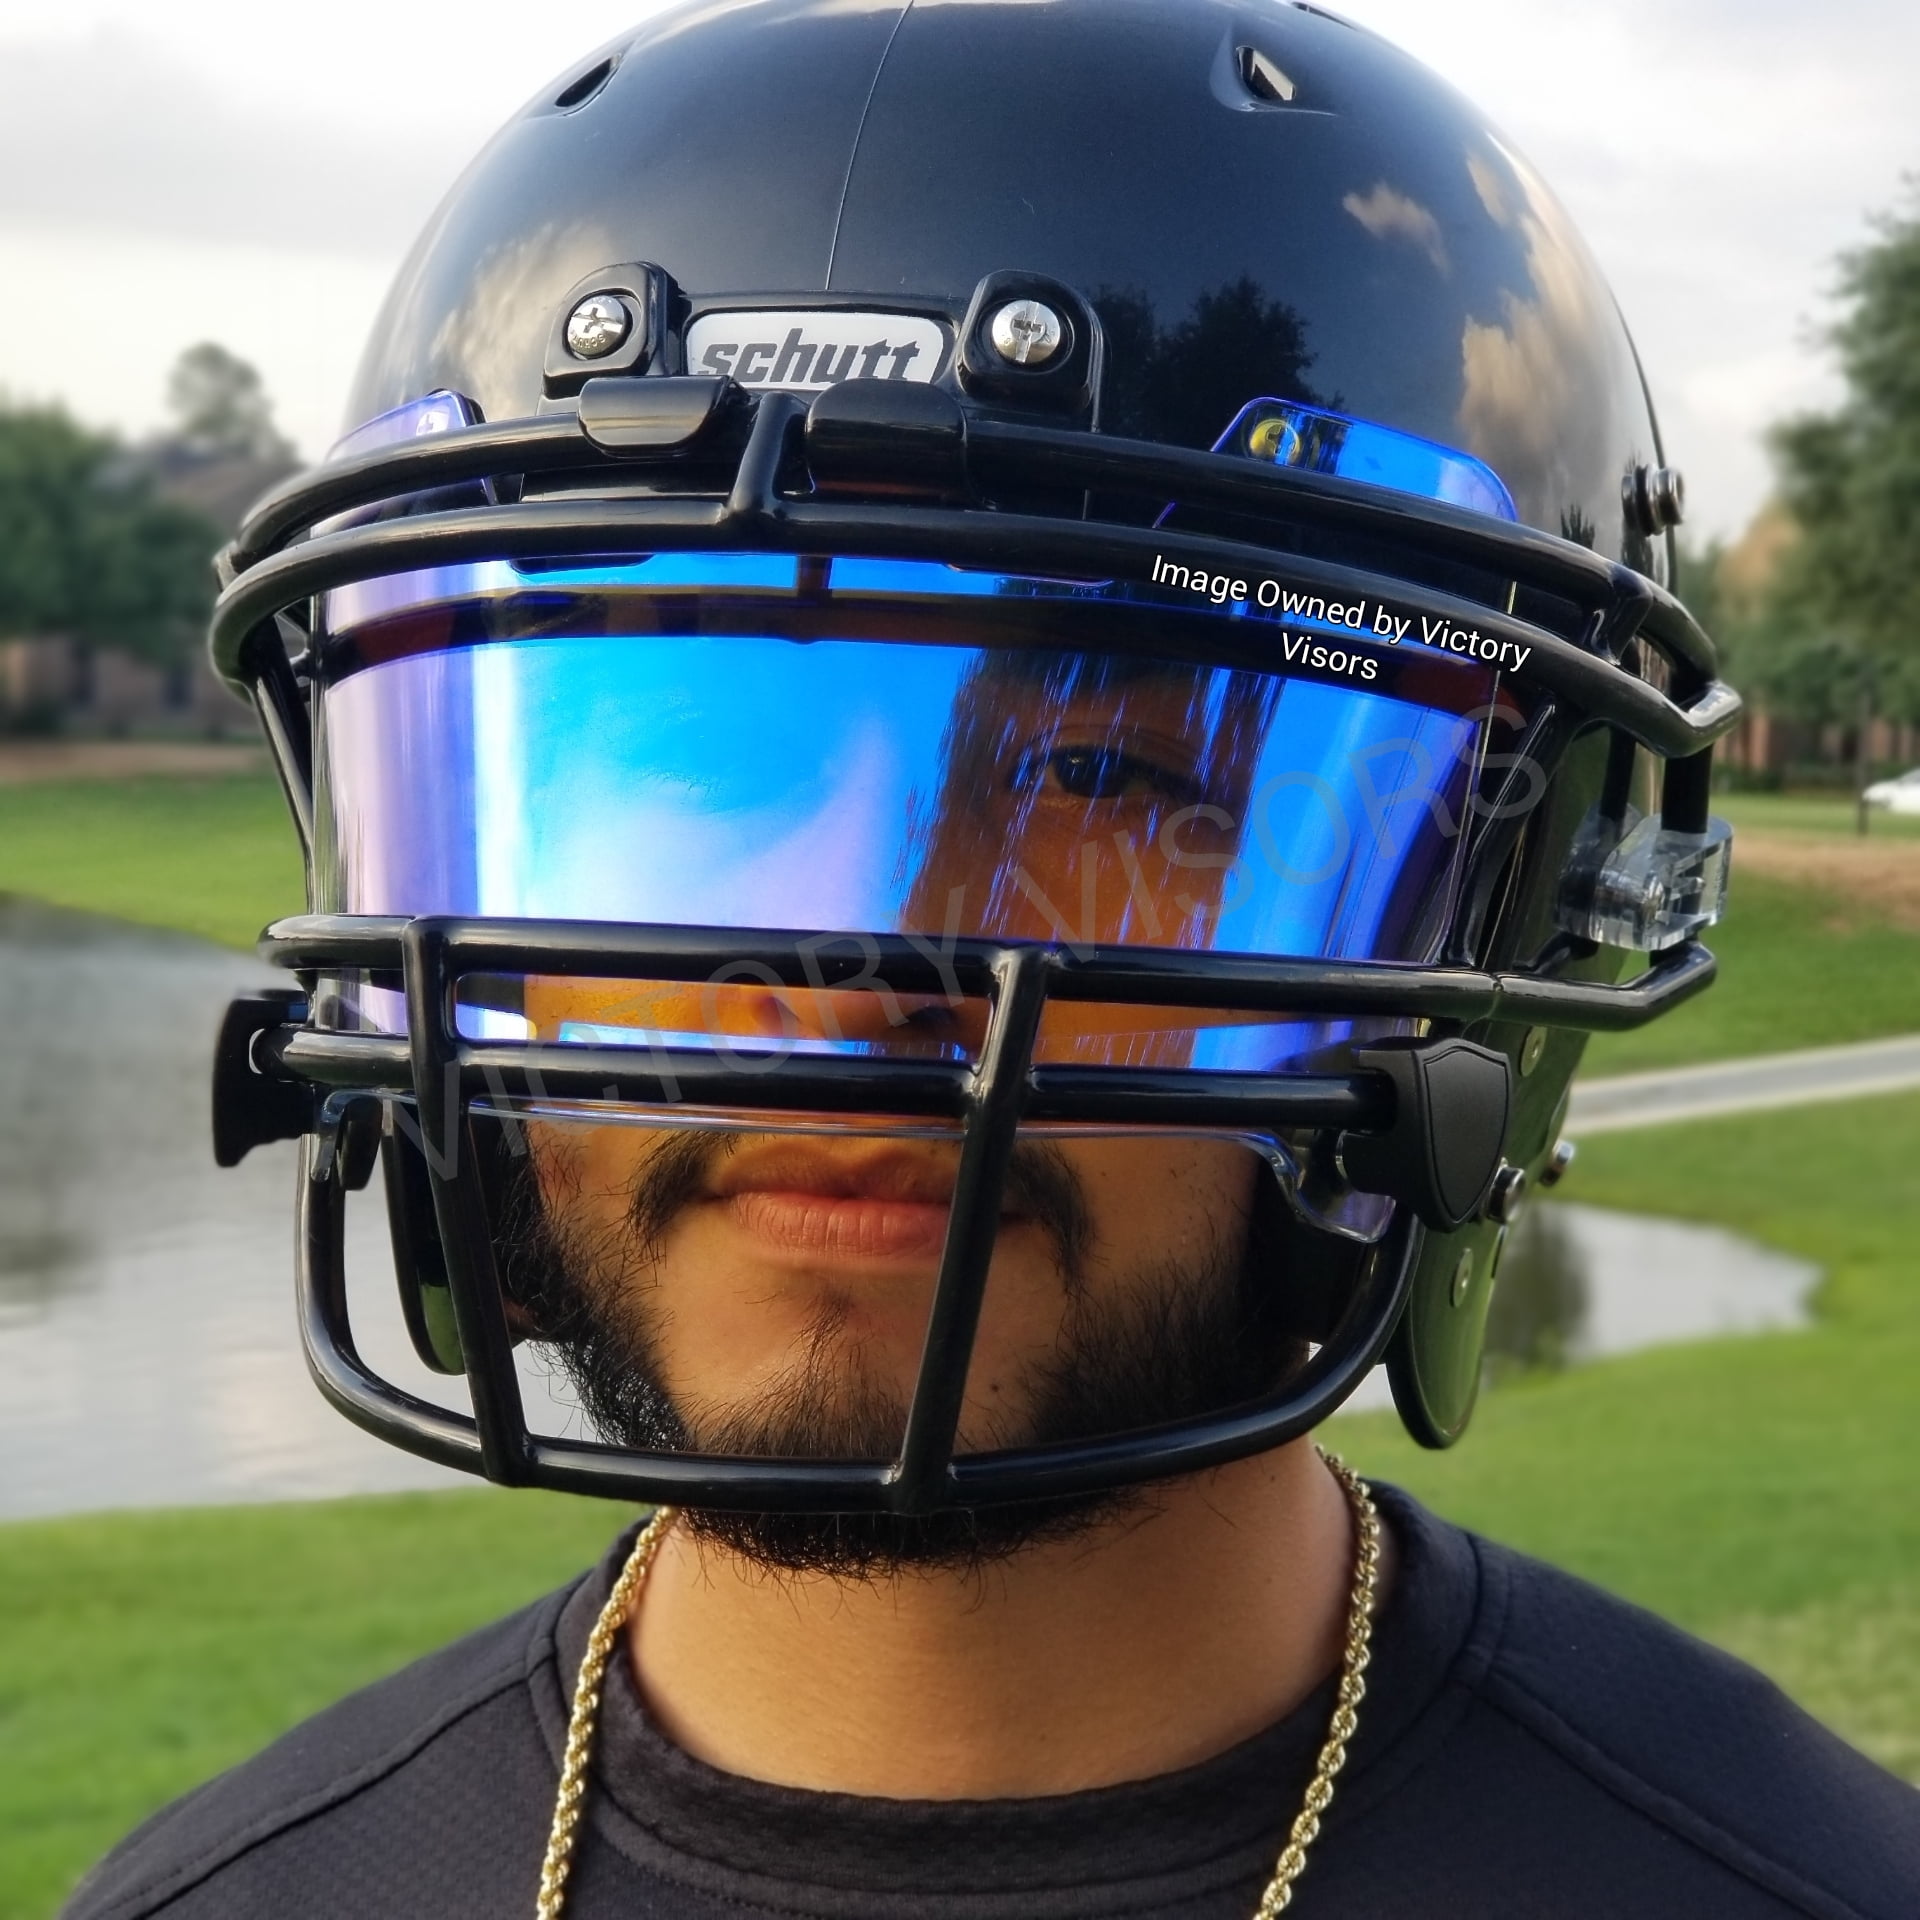 Under Armour 10 Percent Grey Football Visor Available Only from Sports Depot Darkest Eye Shield